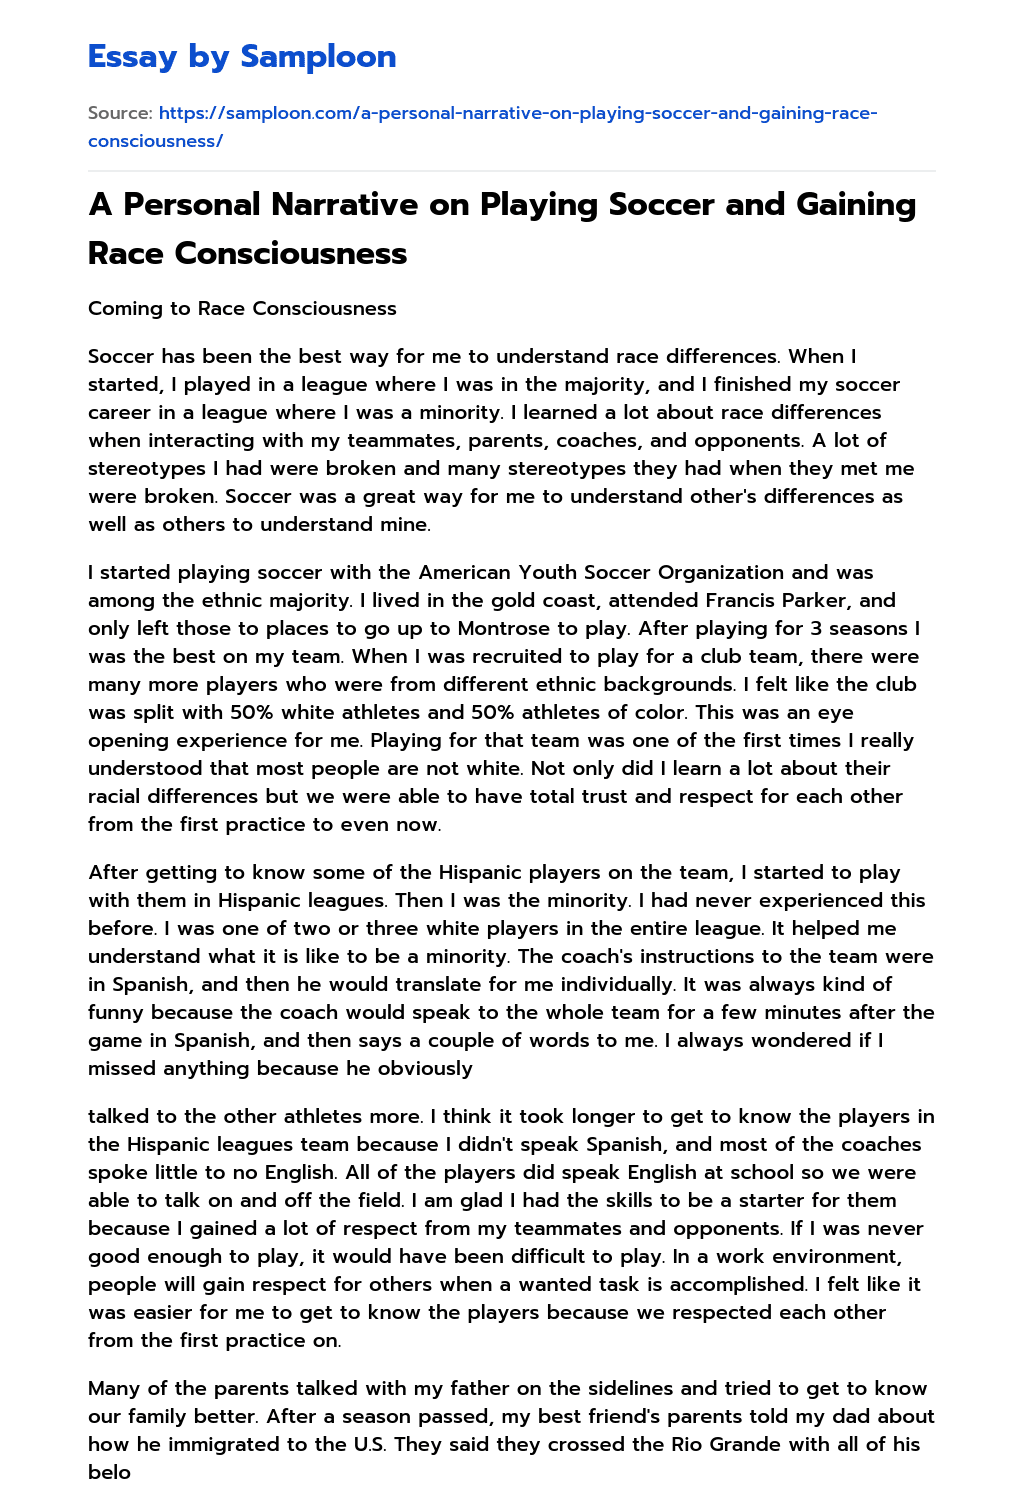 A Personal Narrative on Playing Soccer and Gaining Race Consciousness essay